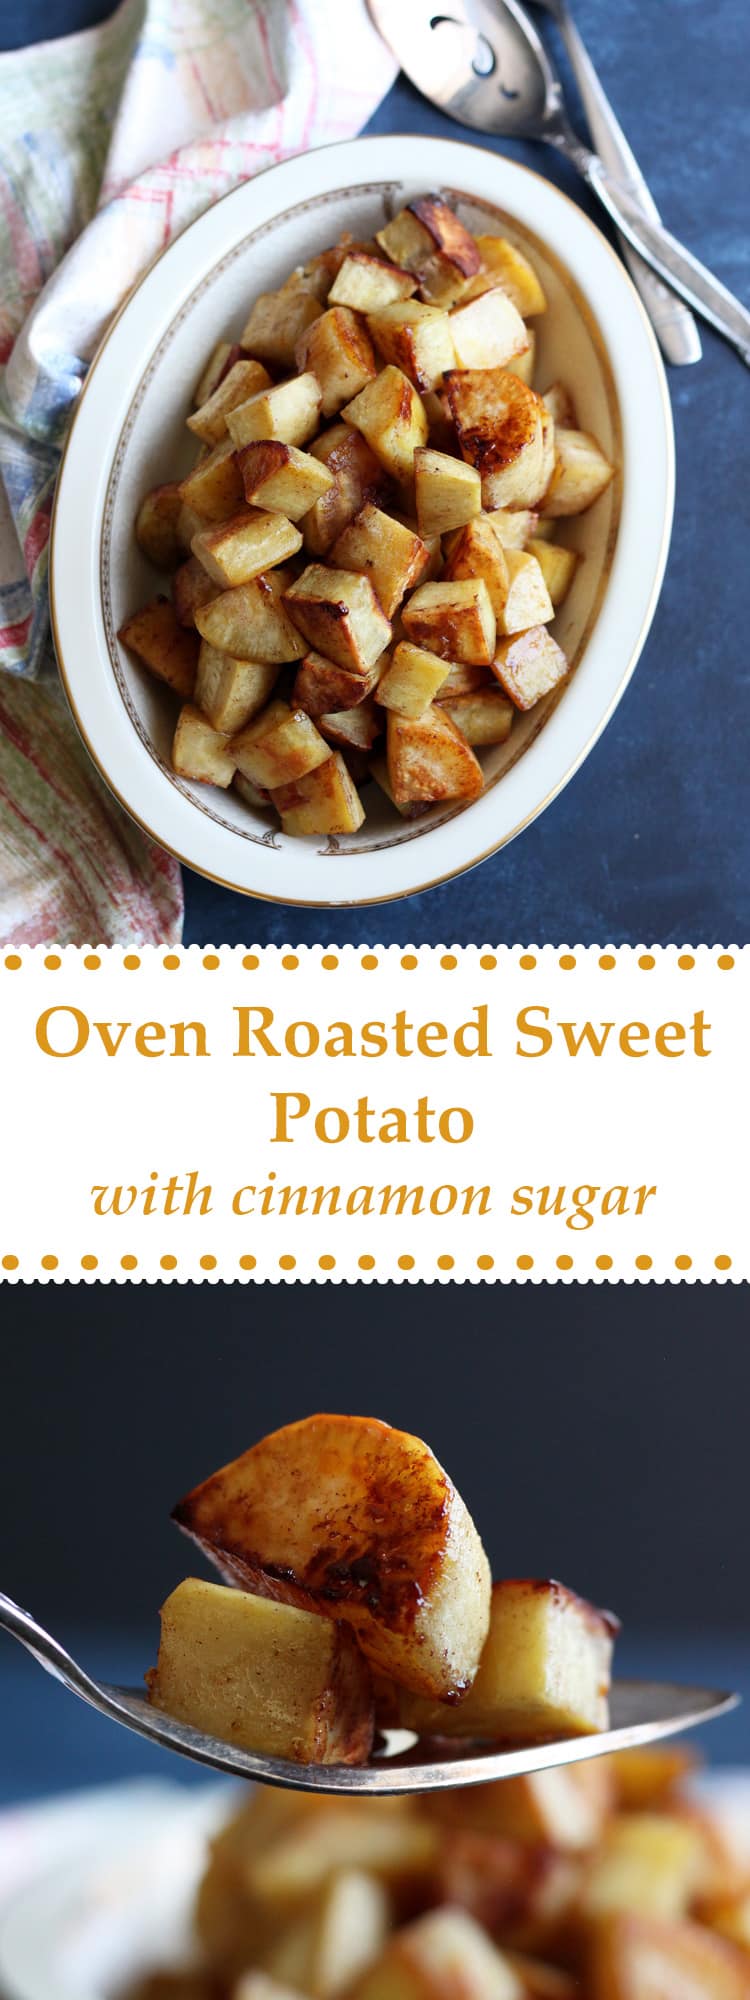 This Oven Roasted Sweet Potato with Cinnamon Sugar is an easy recipe to make for dinner or as a Thanksgiving side dish that will make the house smell great!